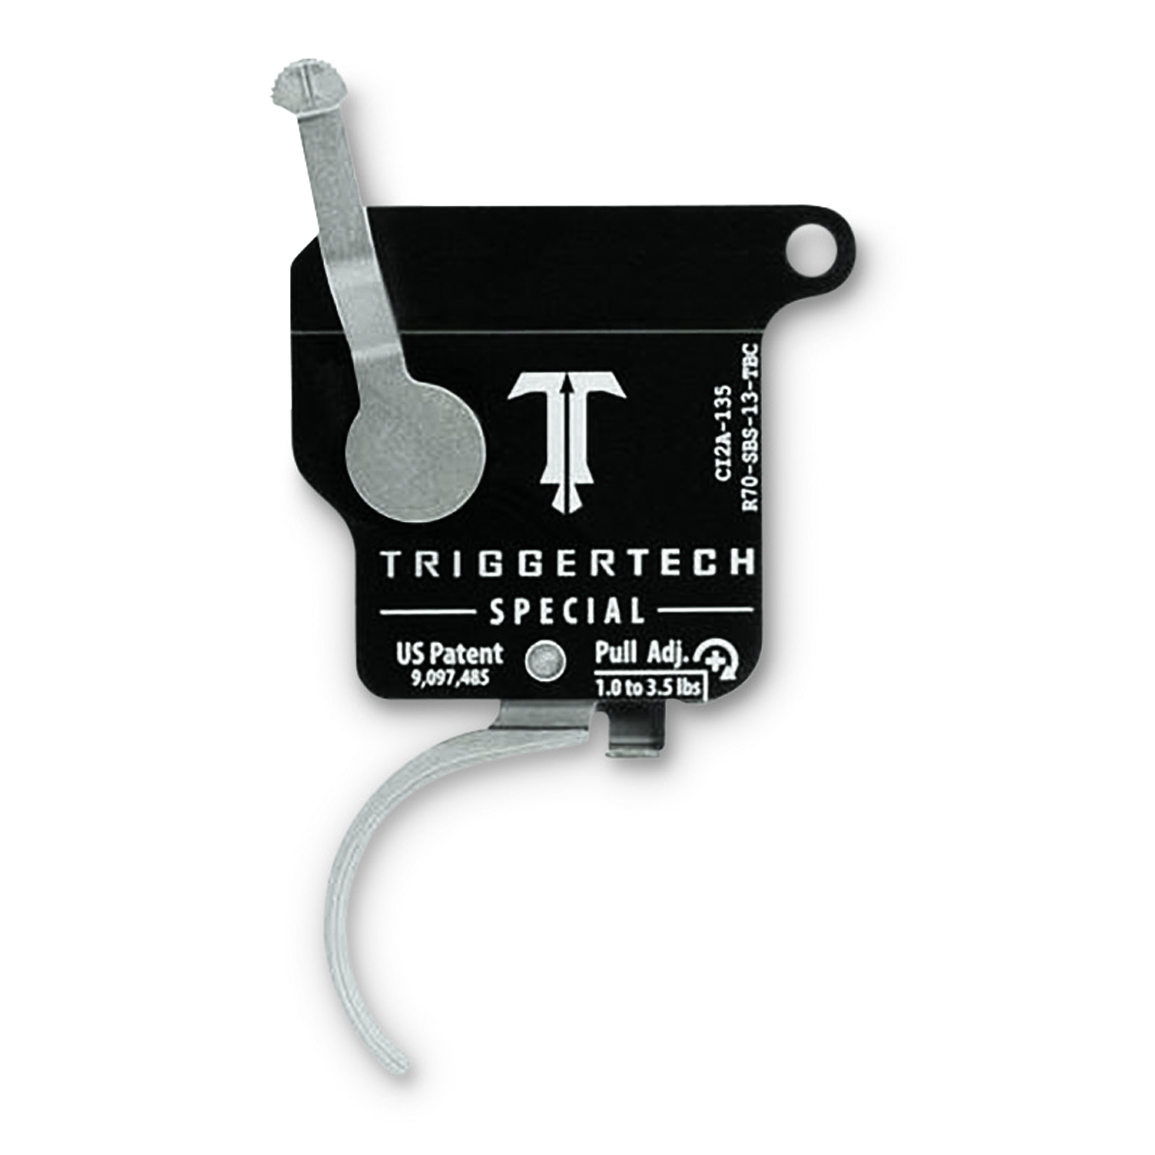 TriggerTech Remington 700 Special Single-Stage Curved Trigger, Right Hand, w/Bolt Release